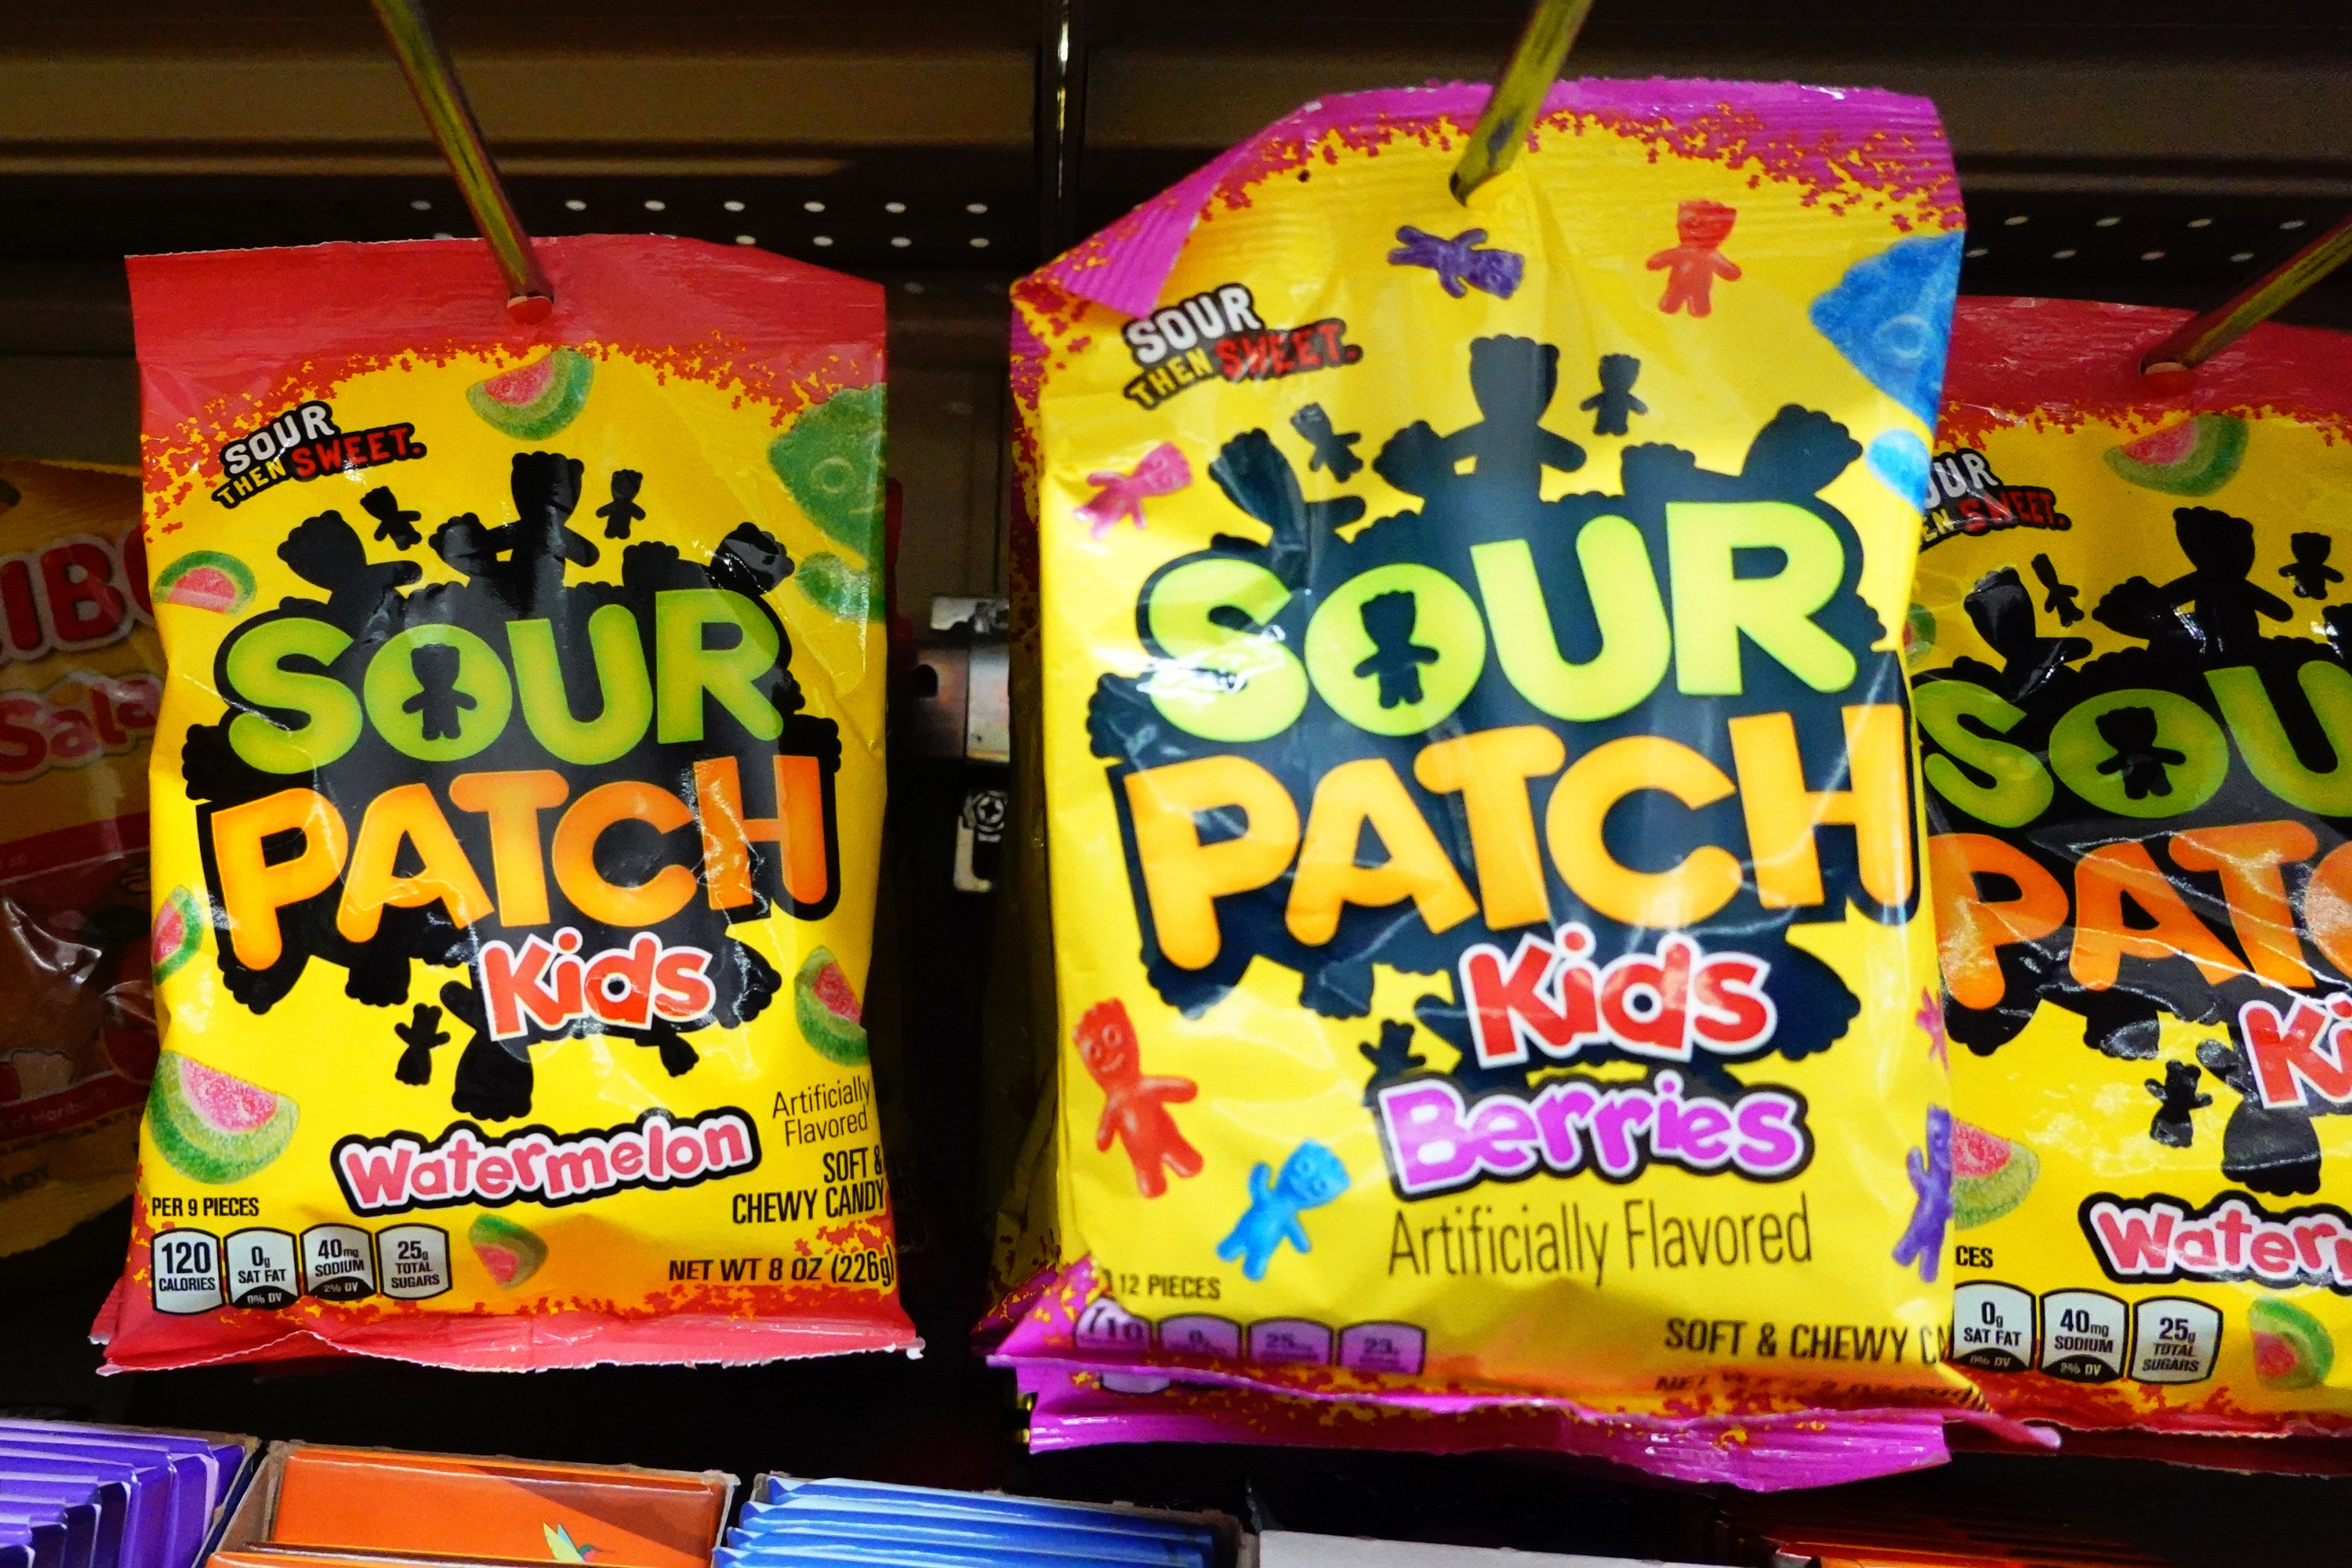 Two bags of Sour Patch Kids